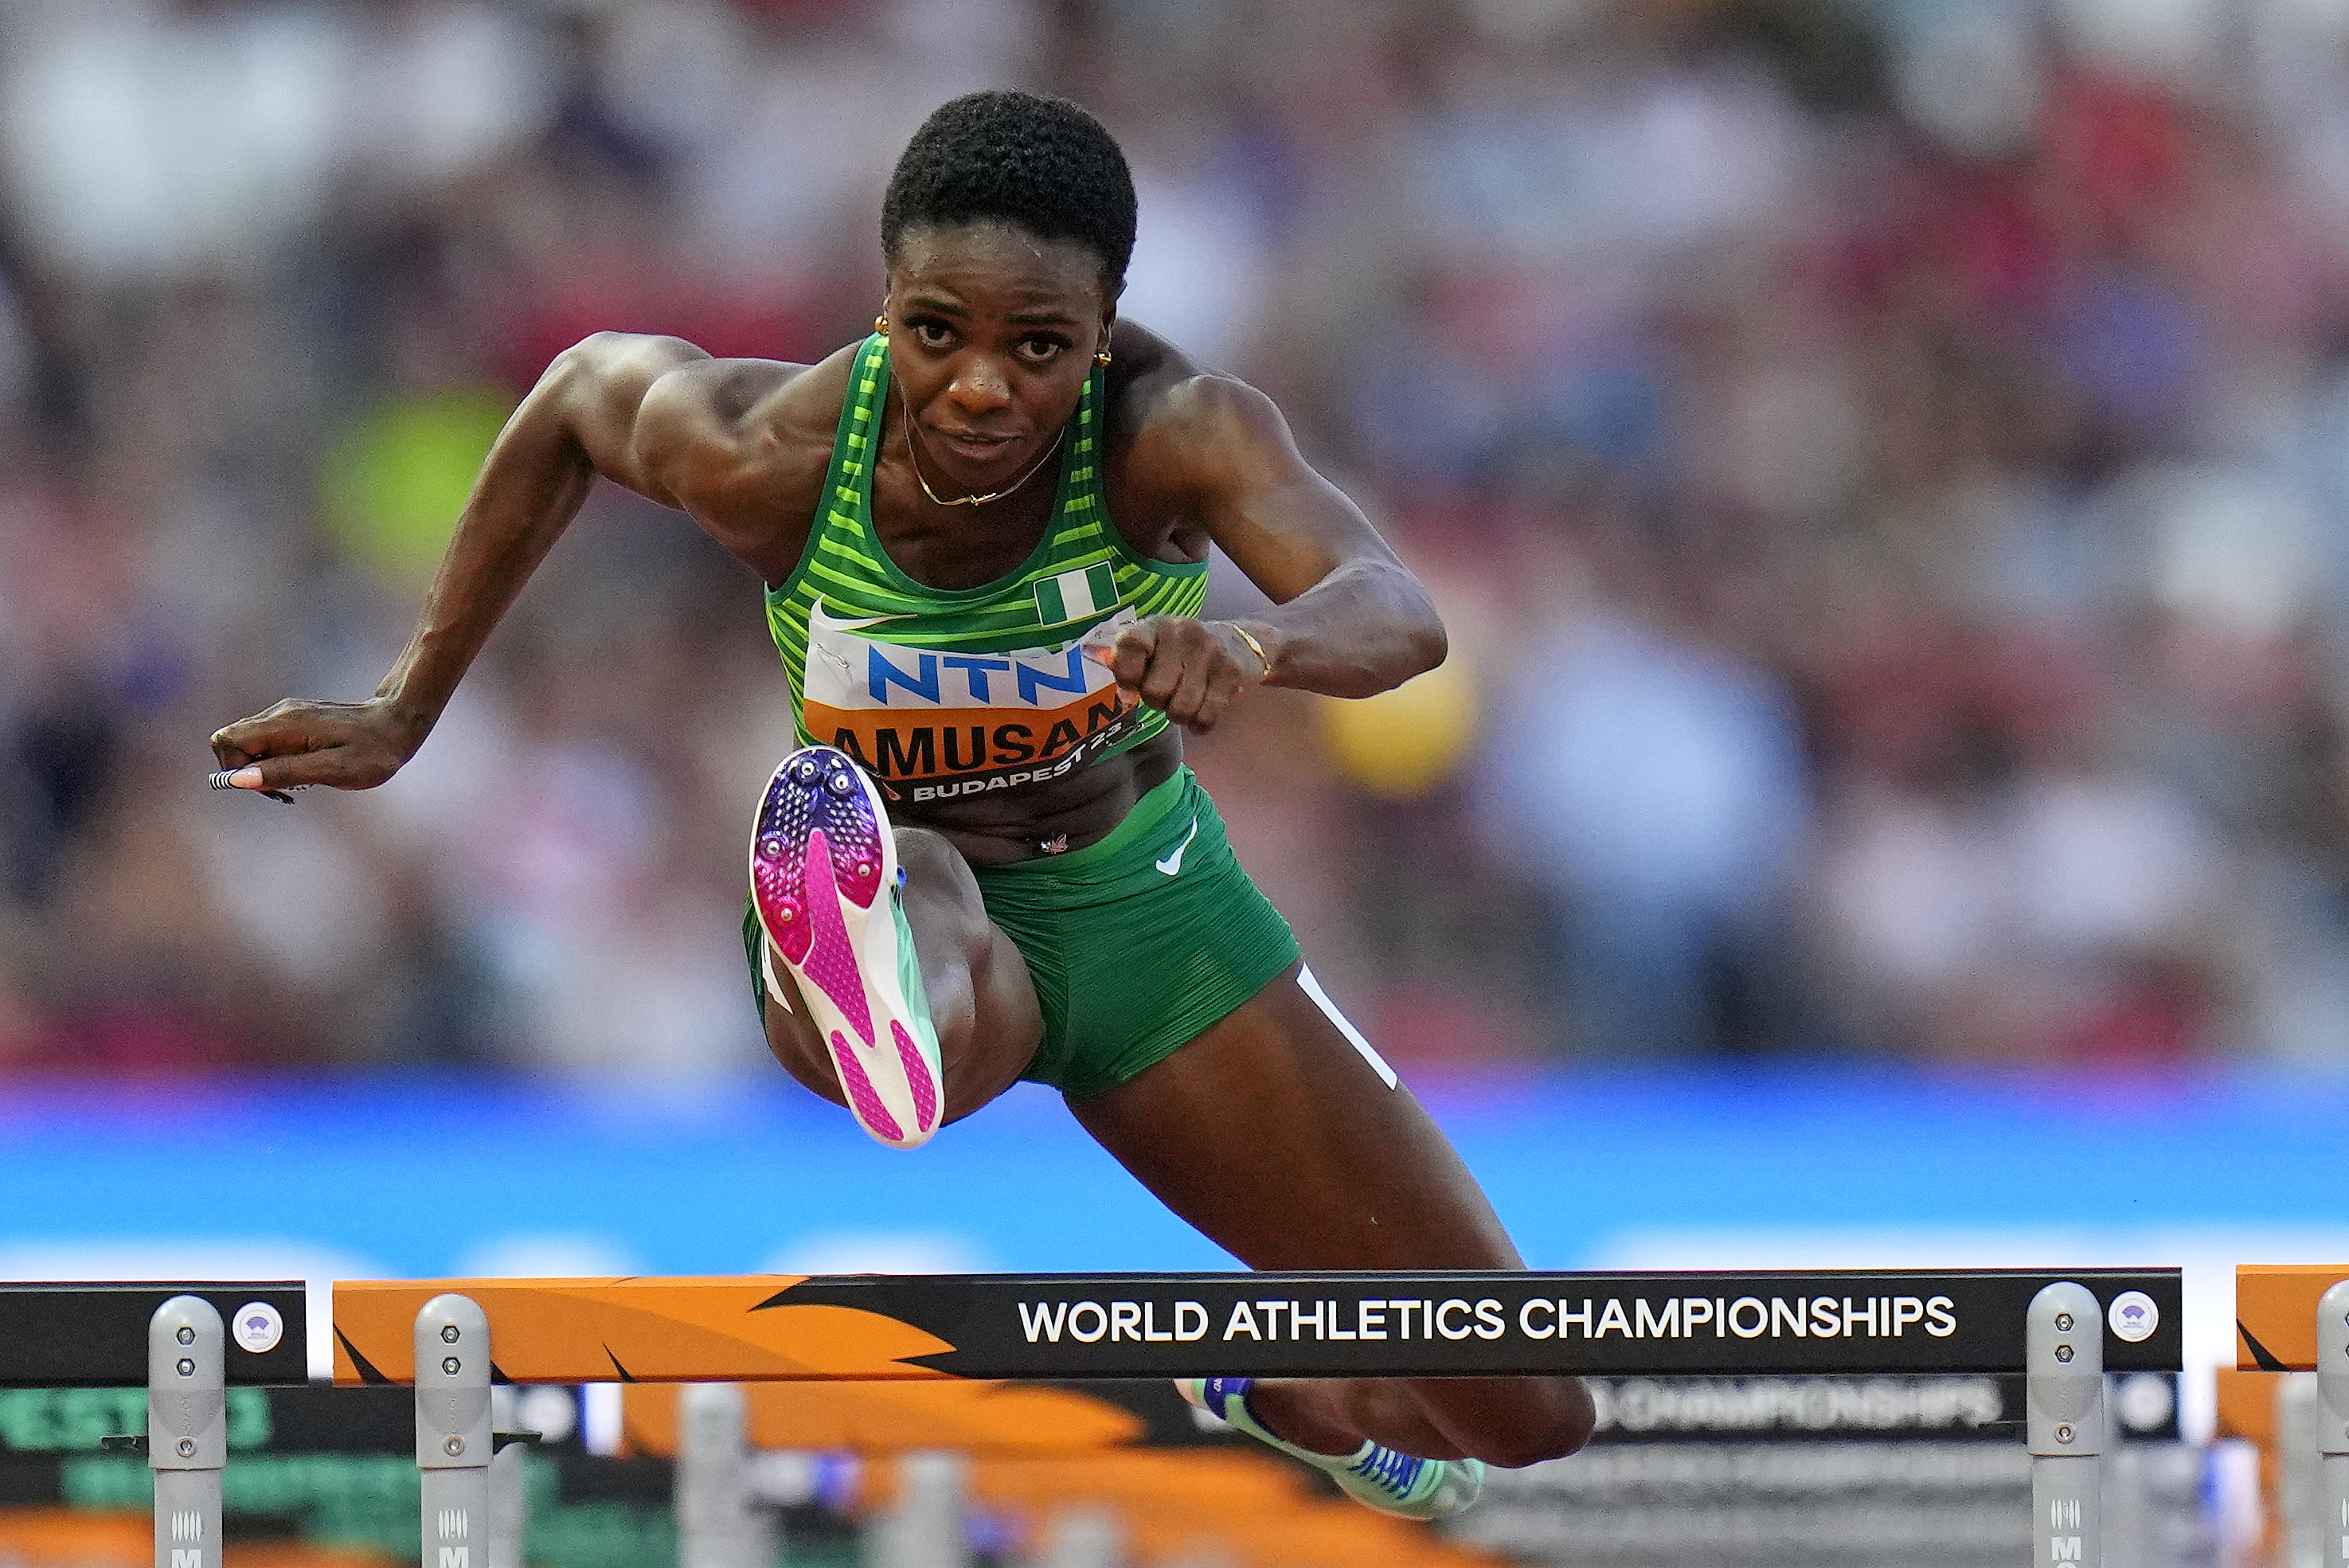 World-record hurdler Amusan never had doubt she'd be at worlds to